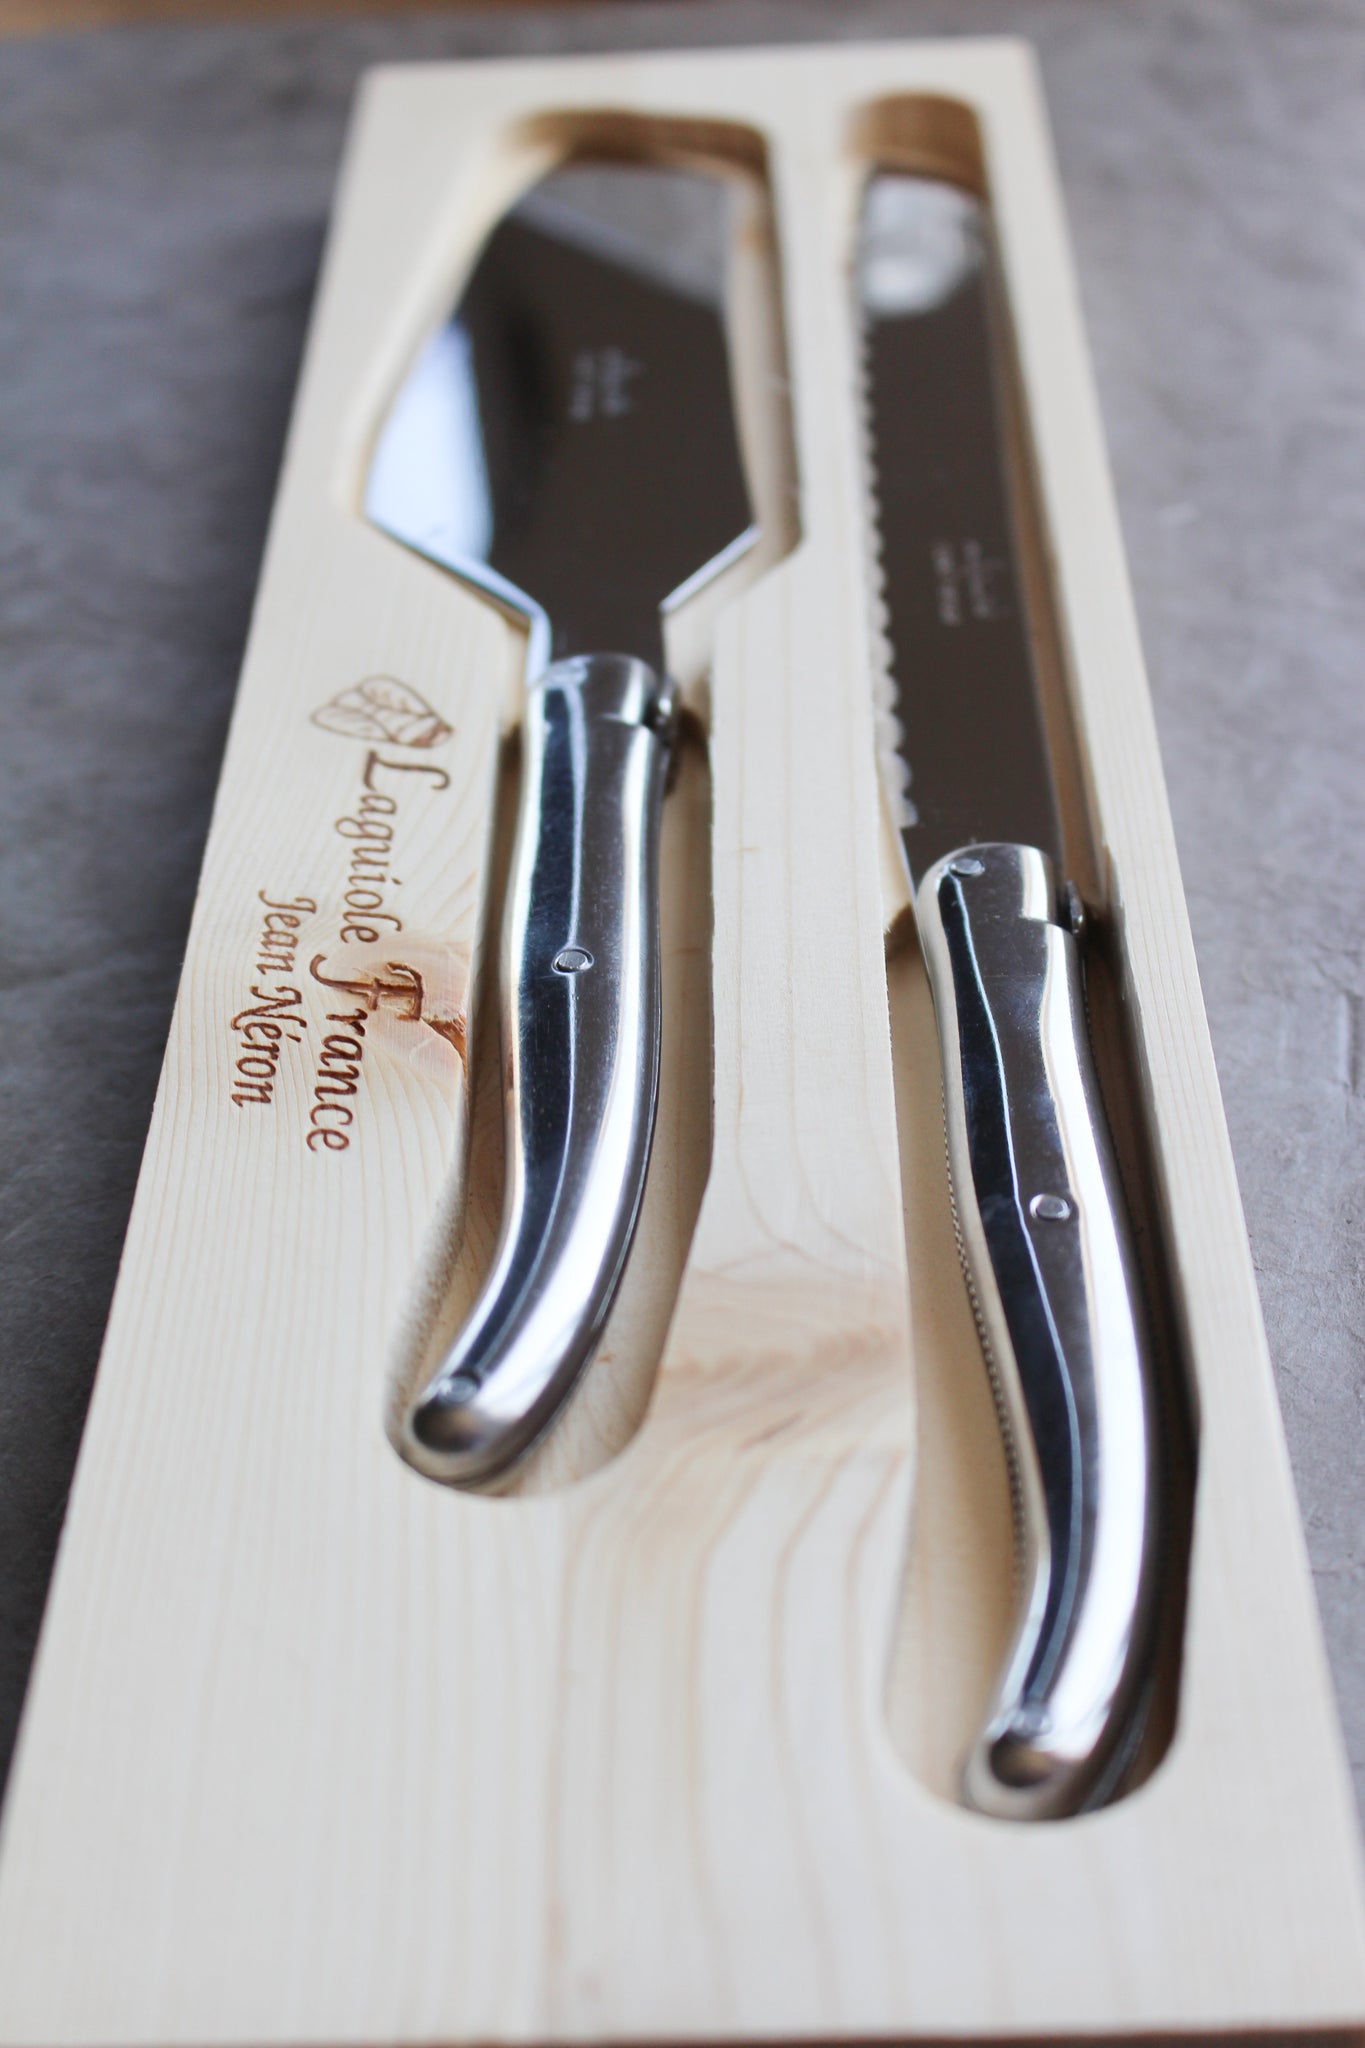 Laguiole Platine Cake & Bread Set All Stainless Wooden Box - French Dry Goods